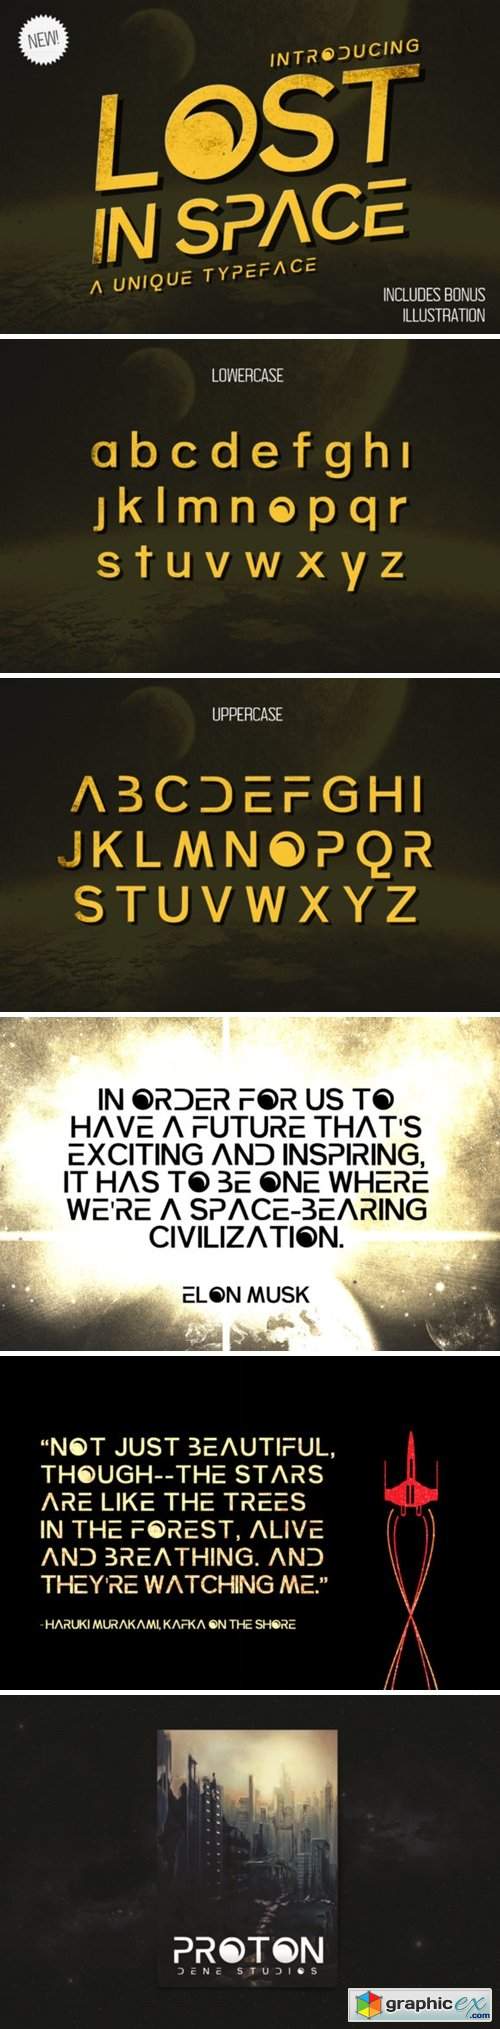  Lost in Space Font 